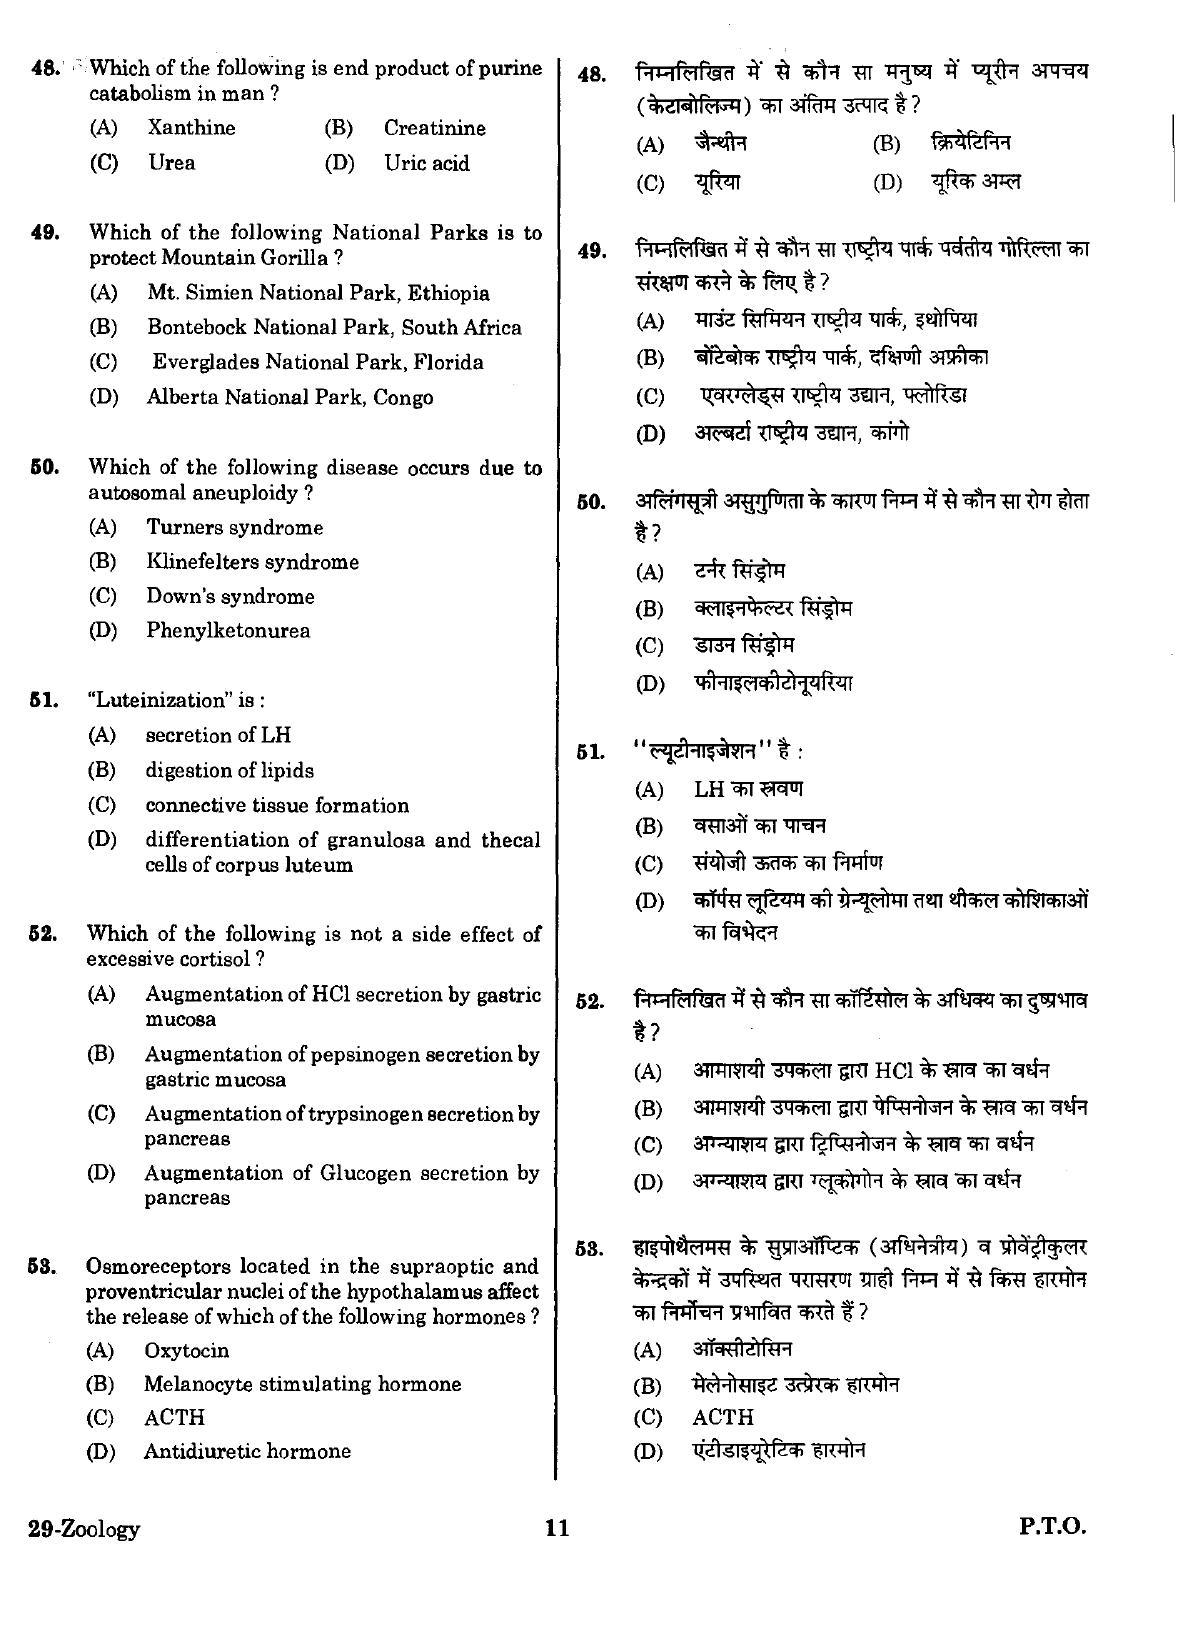 URATPG Zoology Sample Question Paper 2018 - Page 10